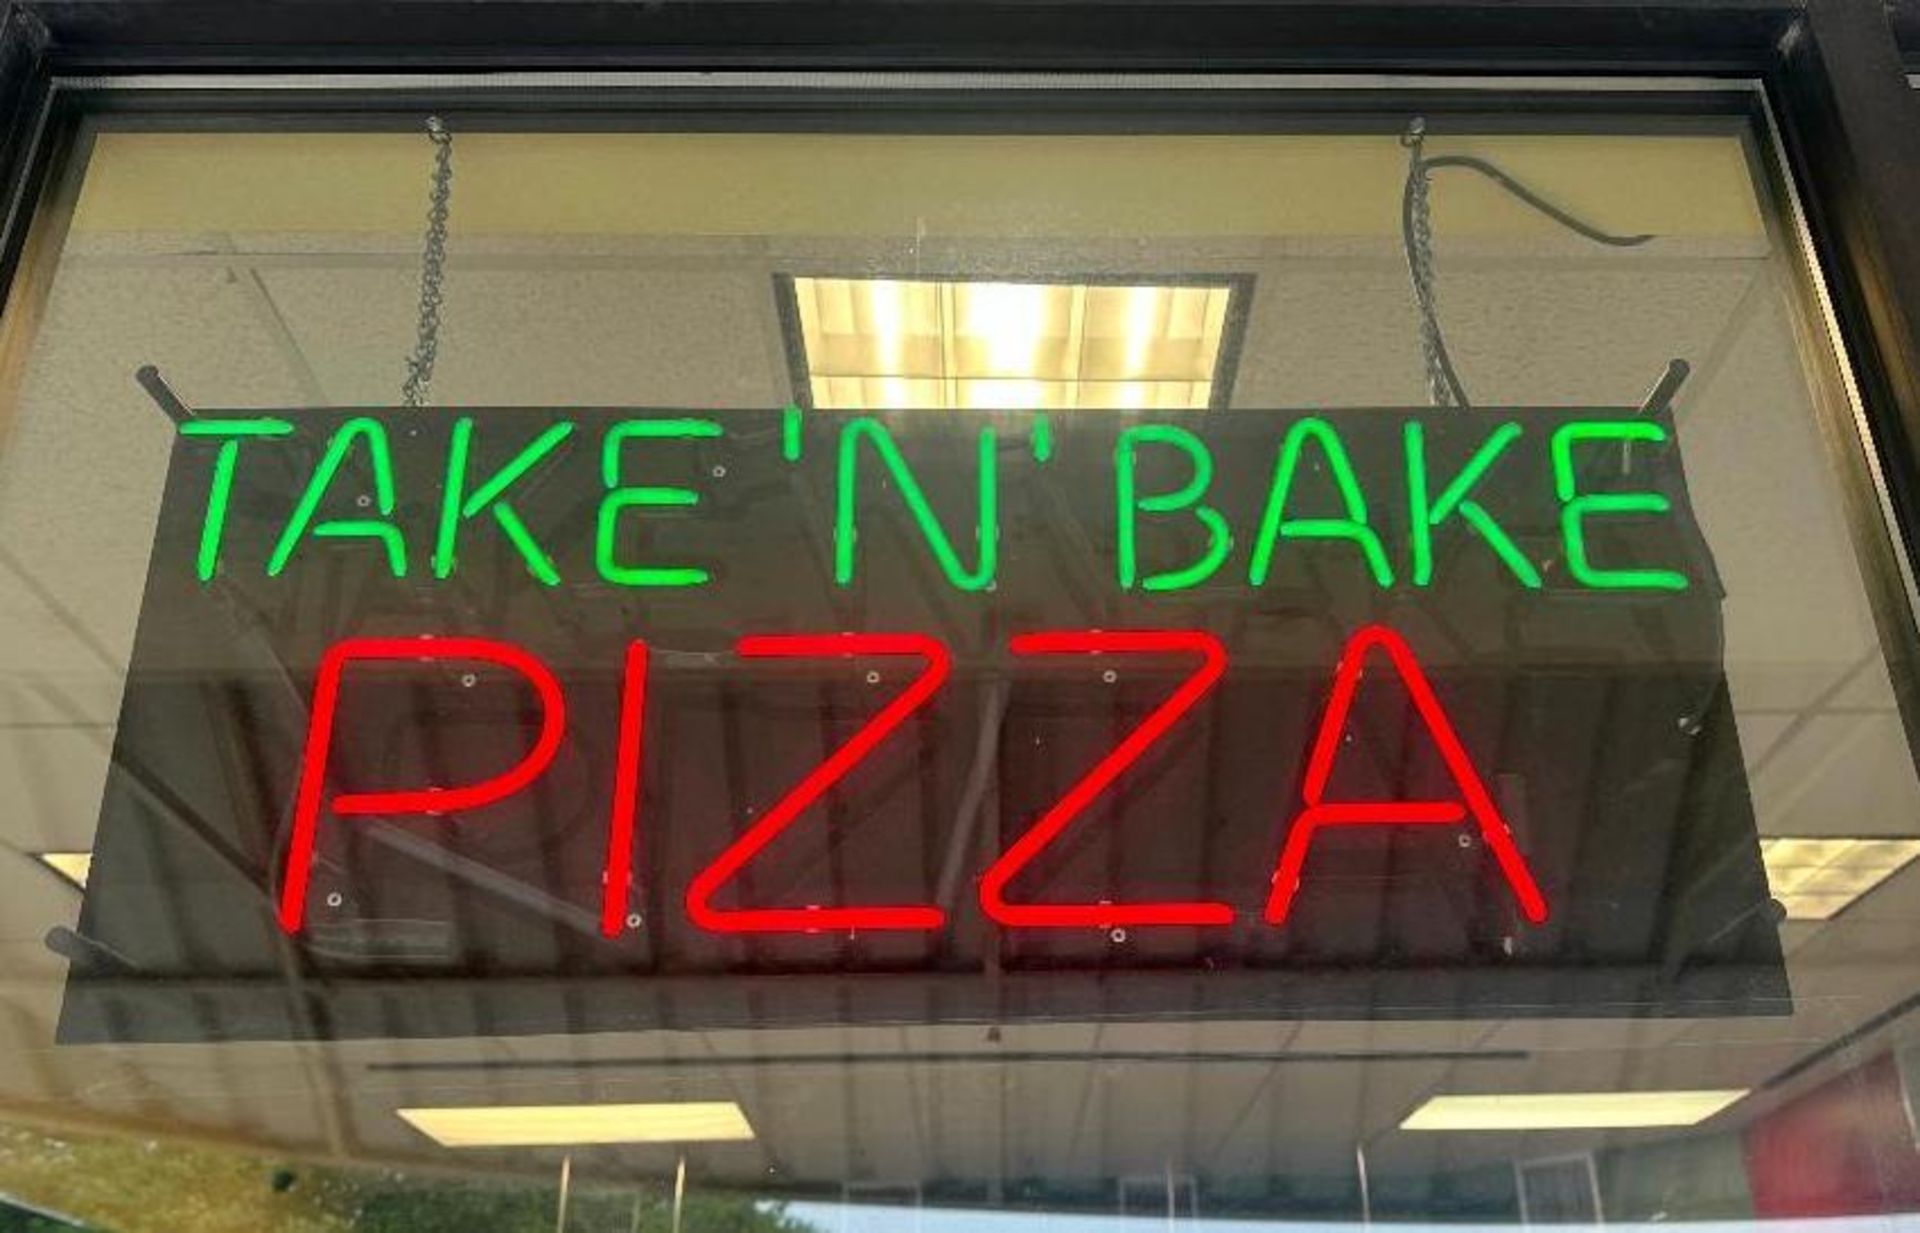 DESCRIPTION " TAKE N BAKE PIZZA" NEON SIGN W/ POWER CORD. ADDITIONAL INFORMATION IN WORKING ORDER. L